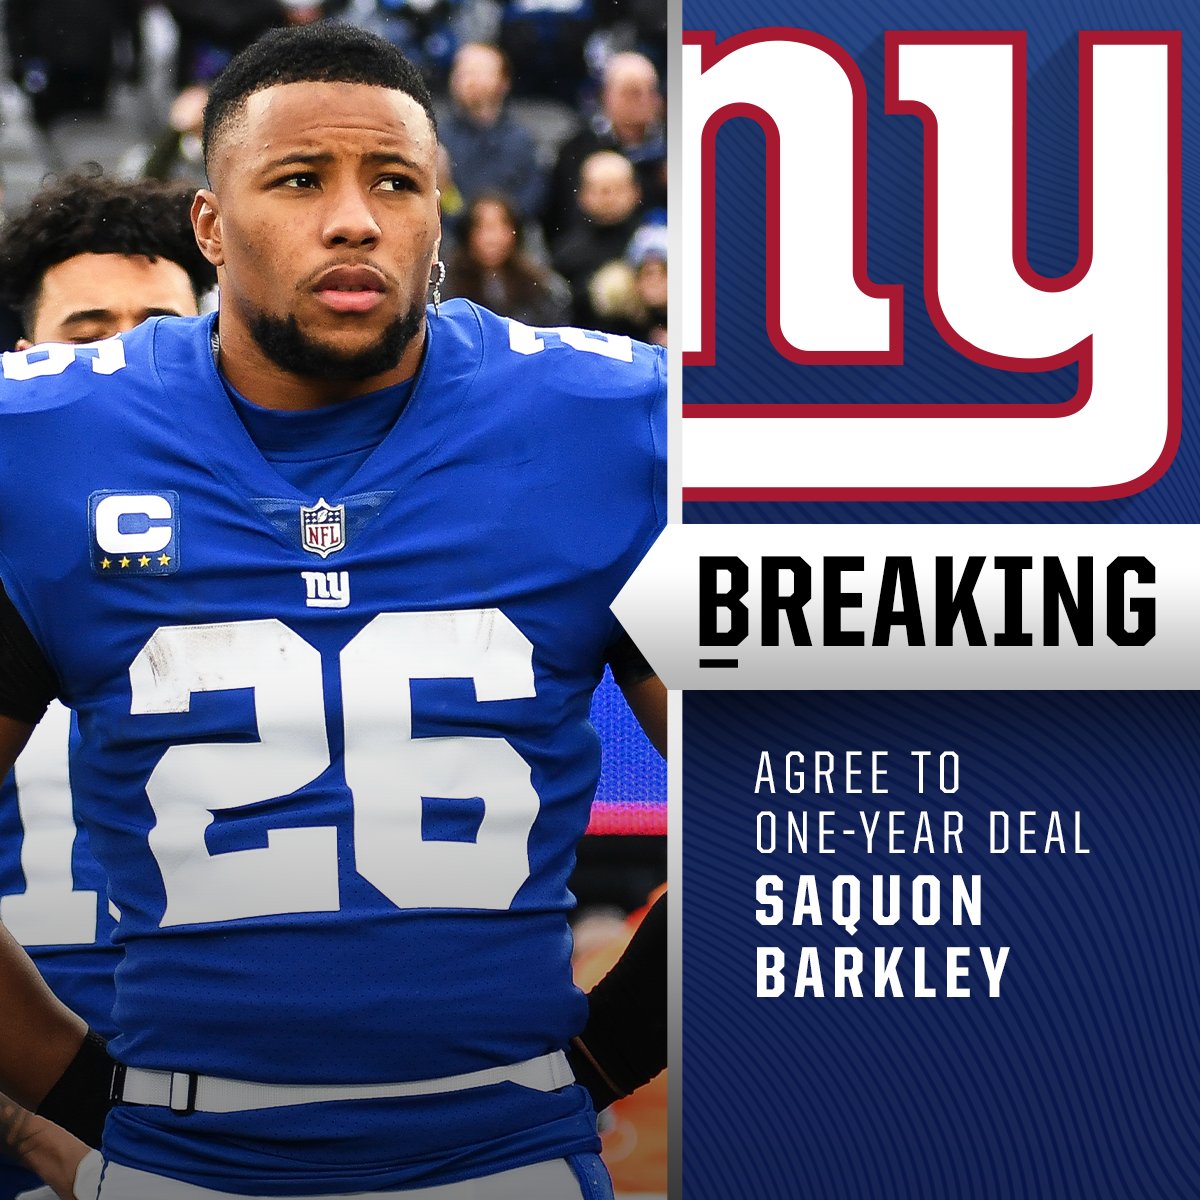 RT @NFL: Giants, RB Saquon Barkley agree to terms on 1-year deal worth up to $11M. (via @RapSheet) https://t.co/jOJ6Y67xy0